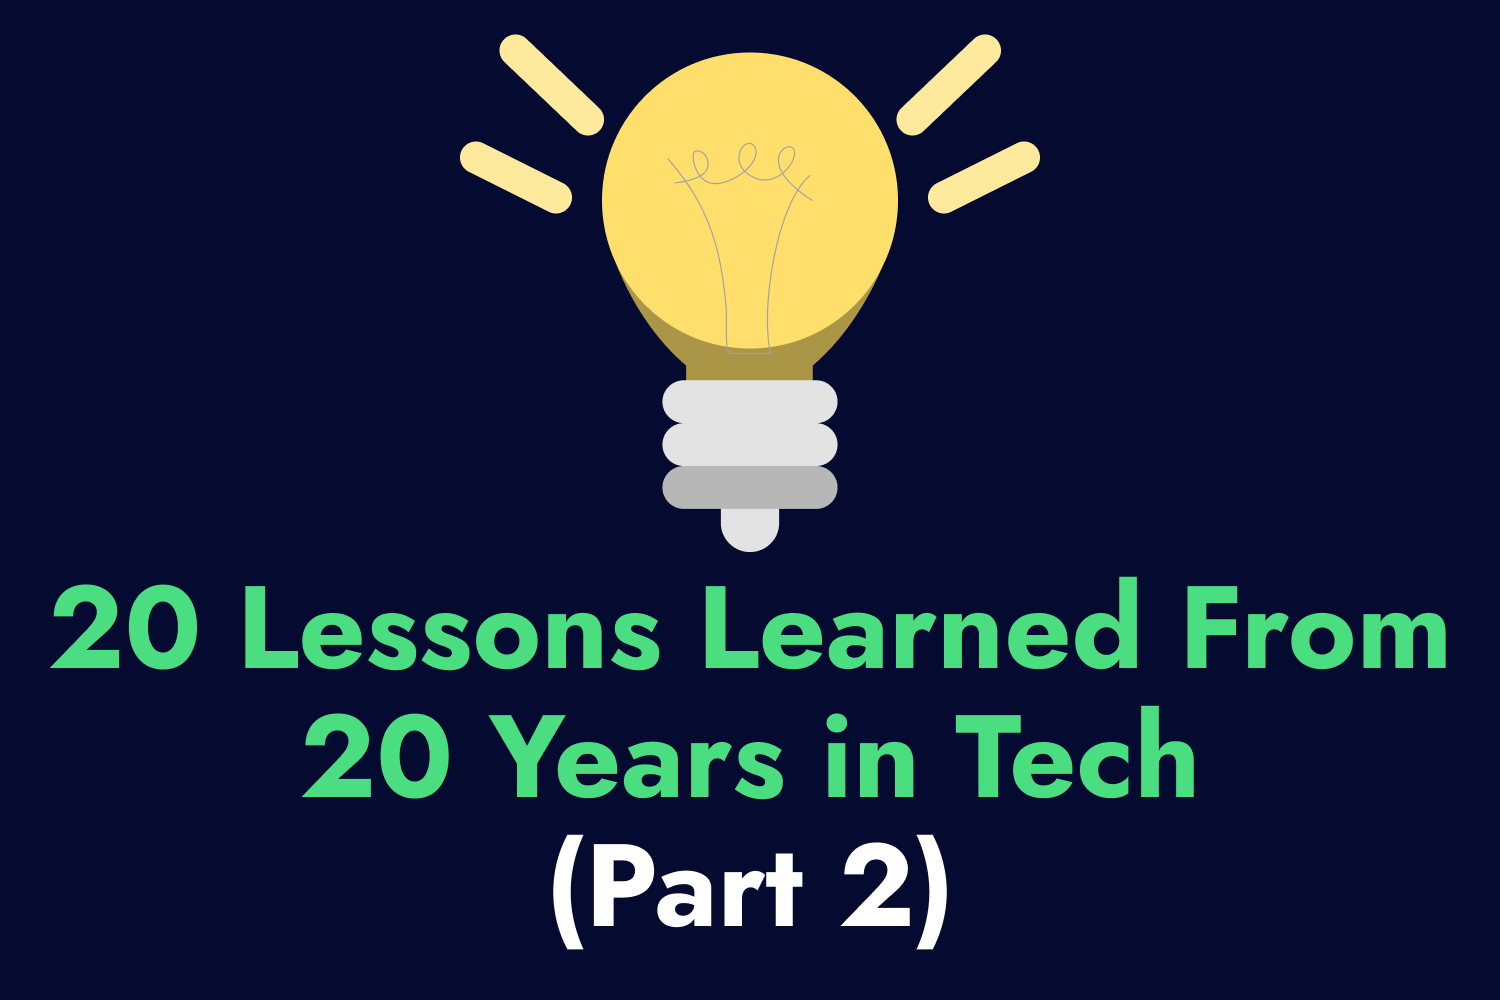 20 Lessons Learned from 20 Years in Tech: Part 2